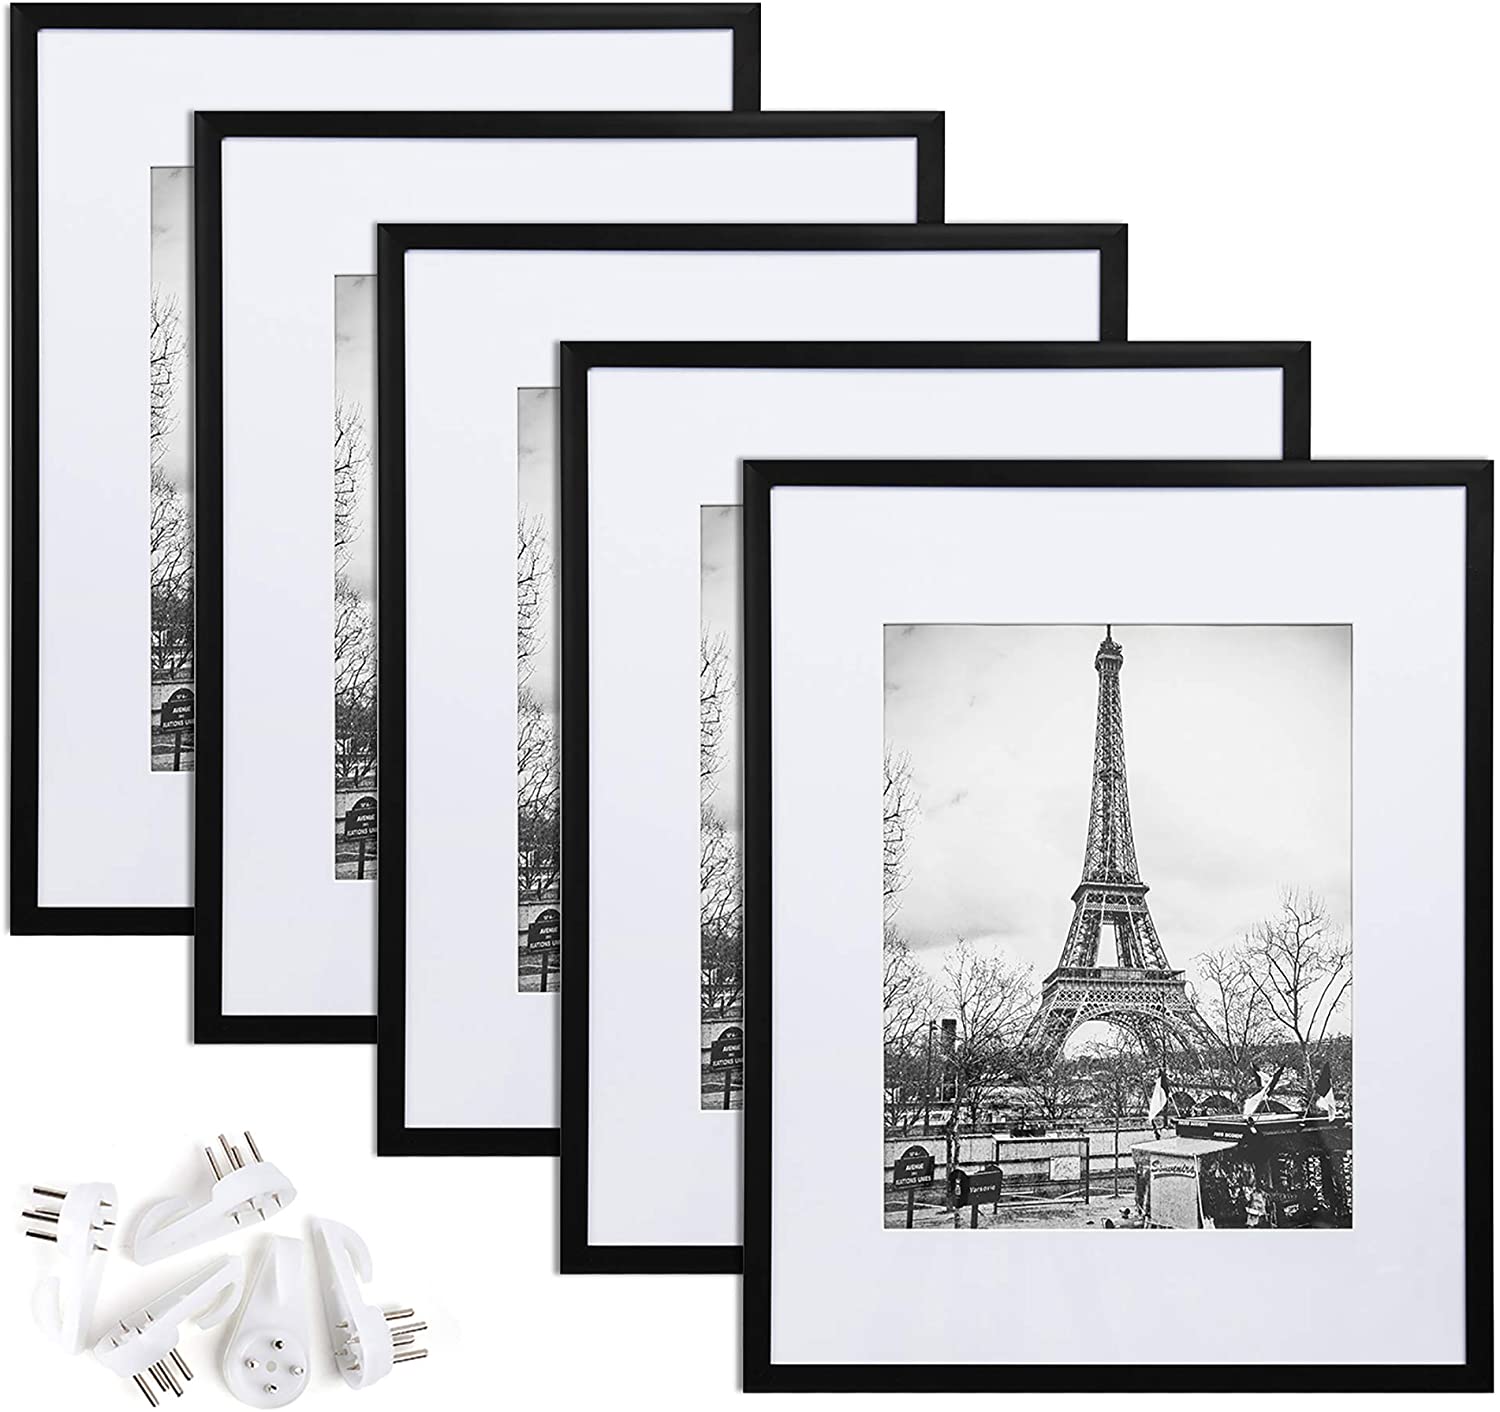 upsimples 16x24 Picture Frame, Display Pictures 14x20 with Mat or 16x24  Without Mat, Wall Hanging Photo Frame, Black, 1 Pack